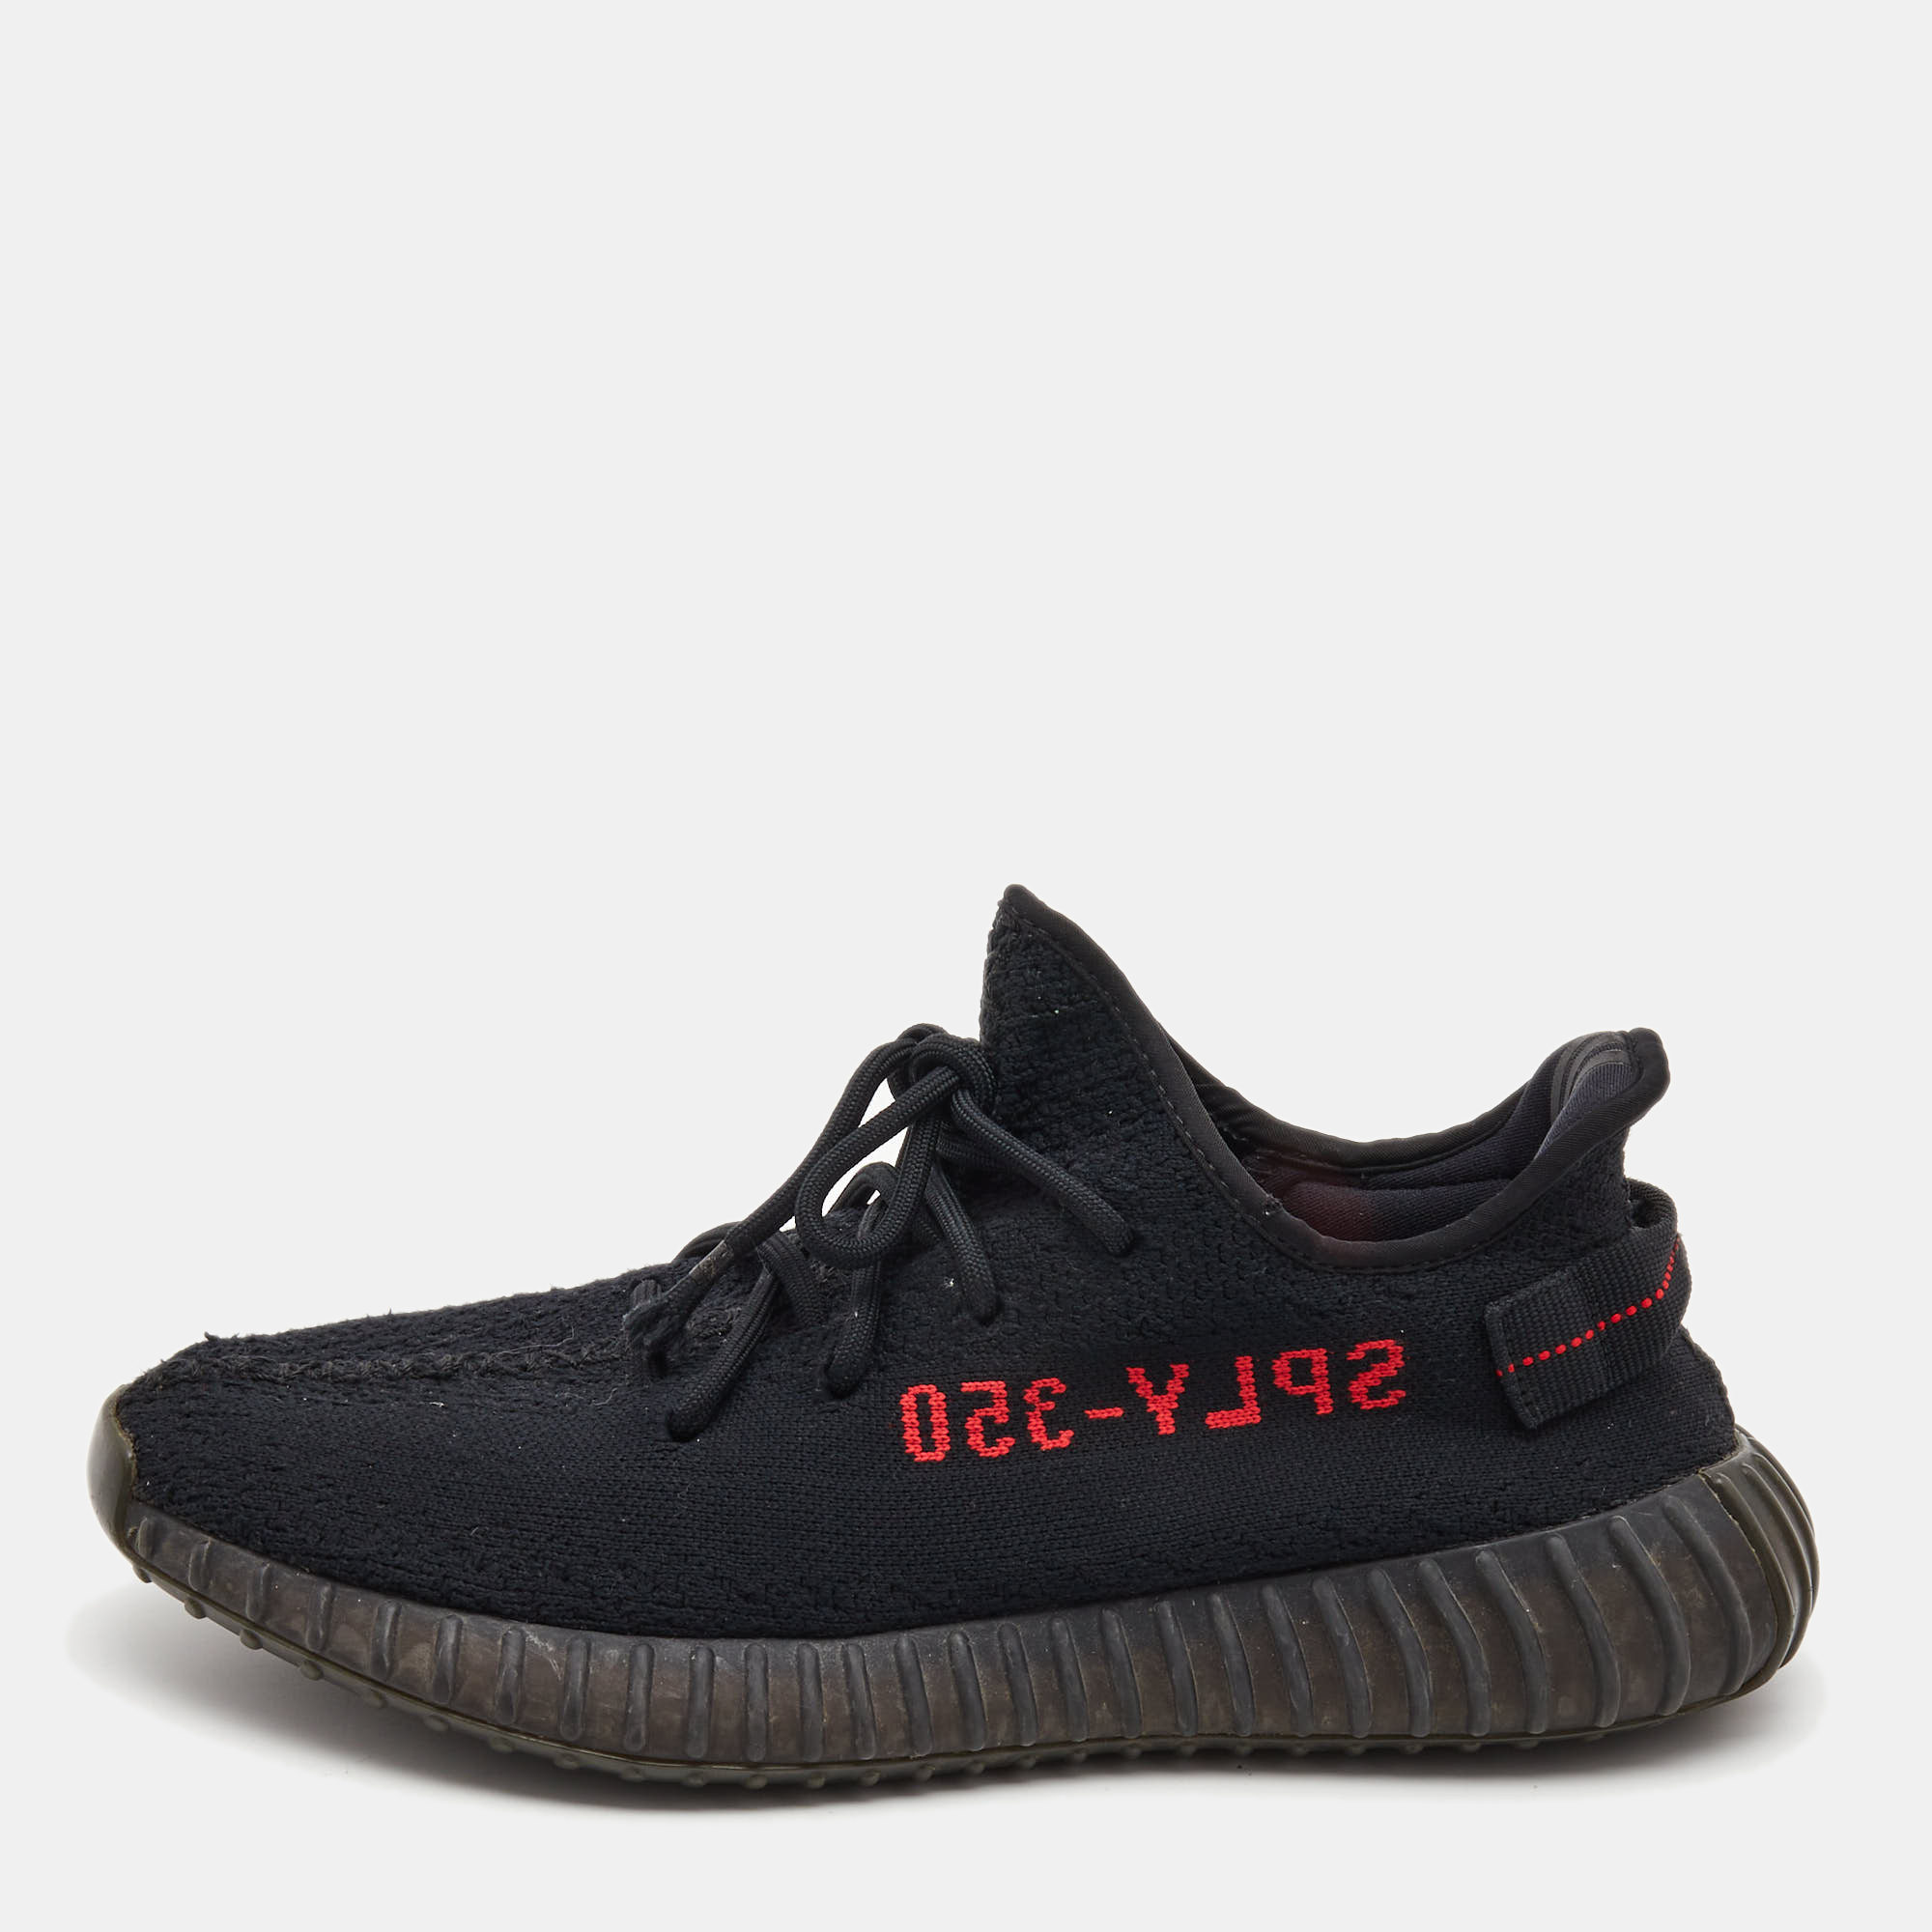 Yeezy X Adidas Black Knit Fabric Boost 350 V2 Bred Sneakers Size 43 1/3